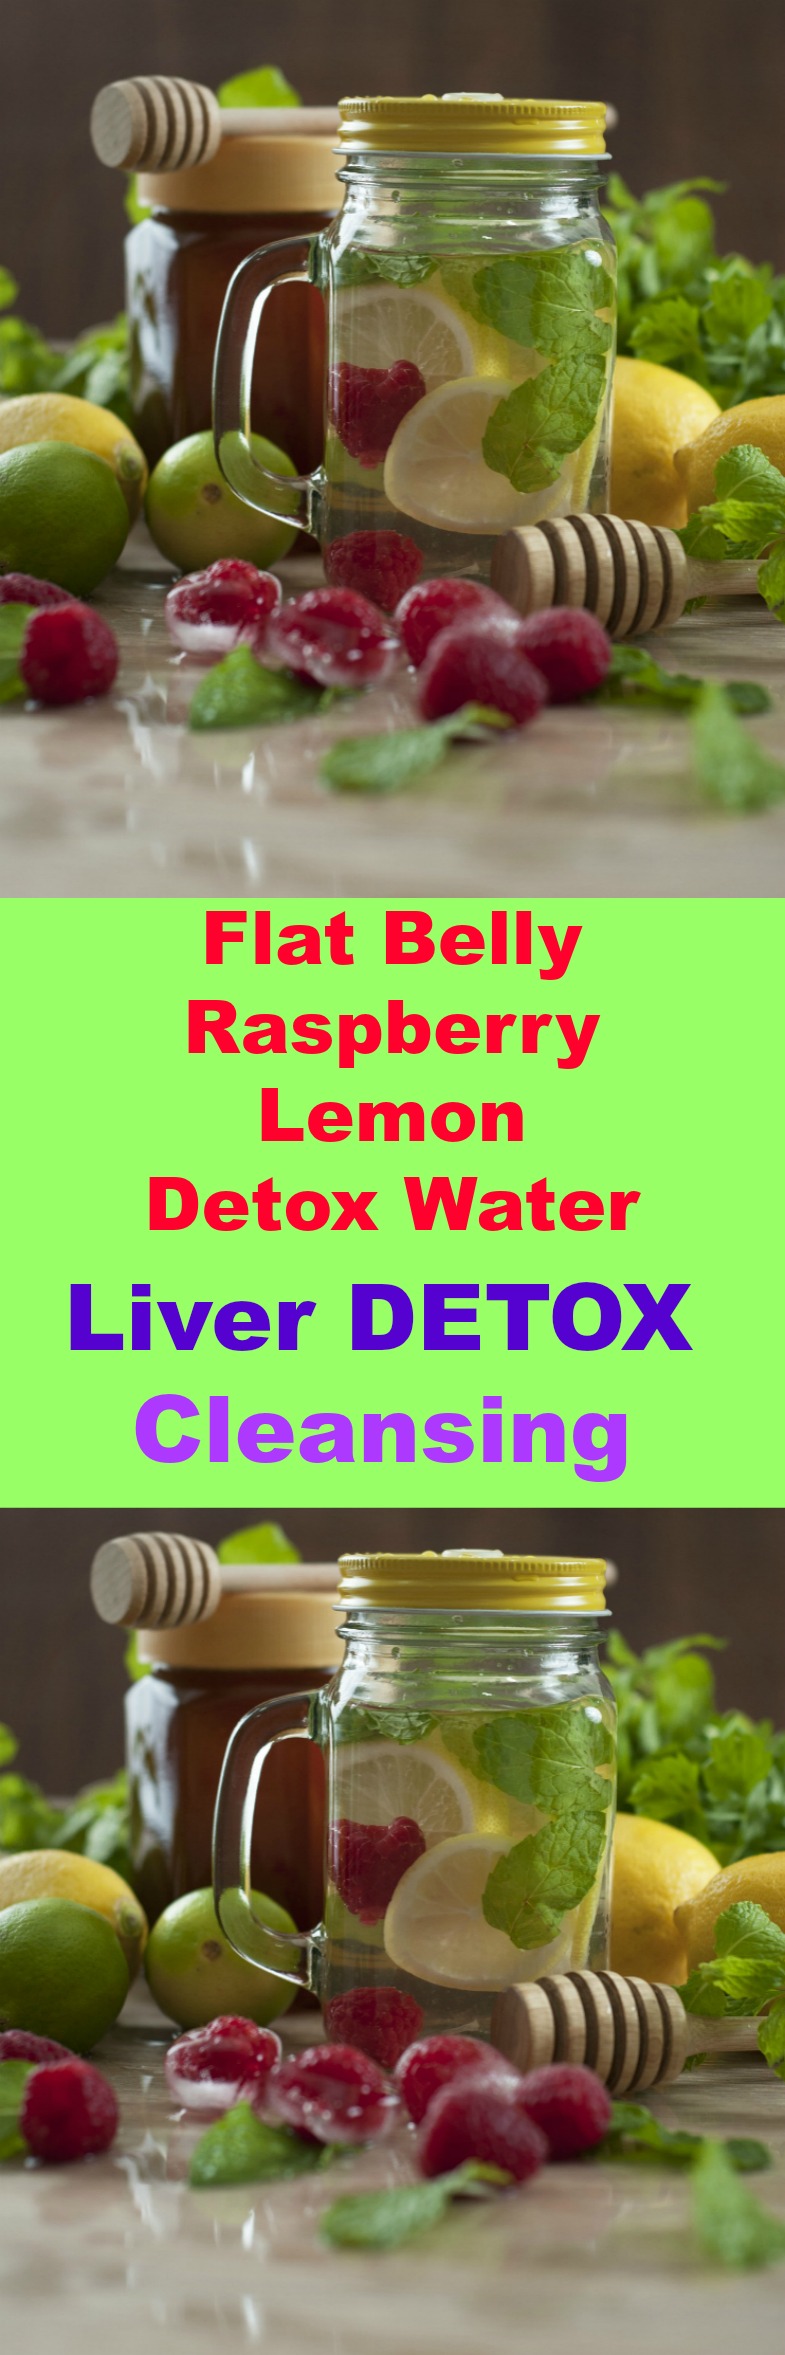 Flat Belly Raspberry Lemon Detox Water to help you with belly bloat! Drink this all day to help flush those toxins from your kidneys, liver, and colon.